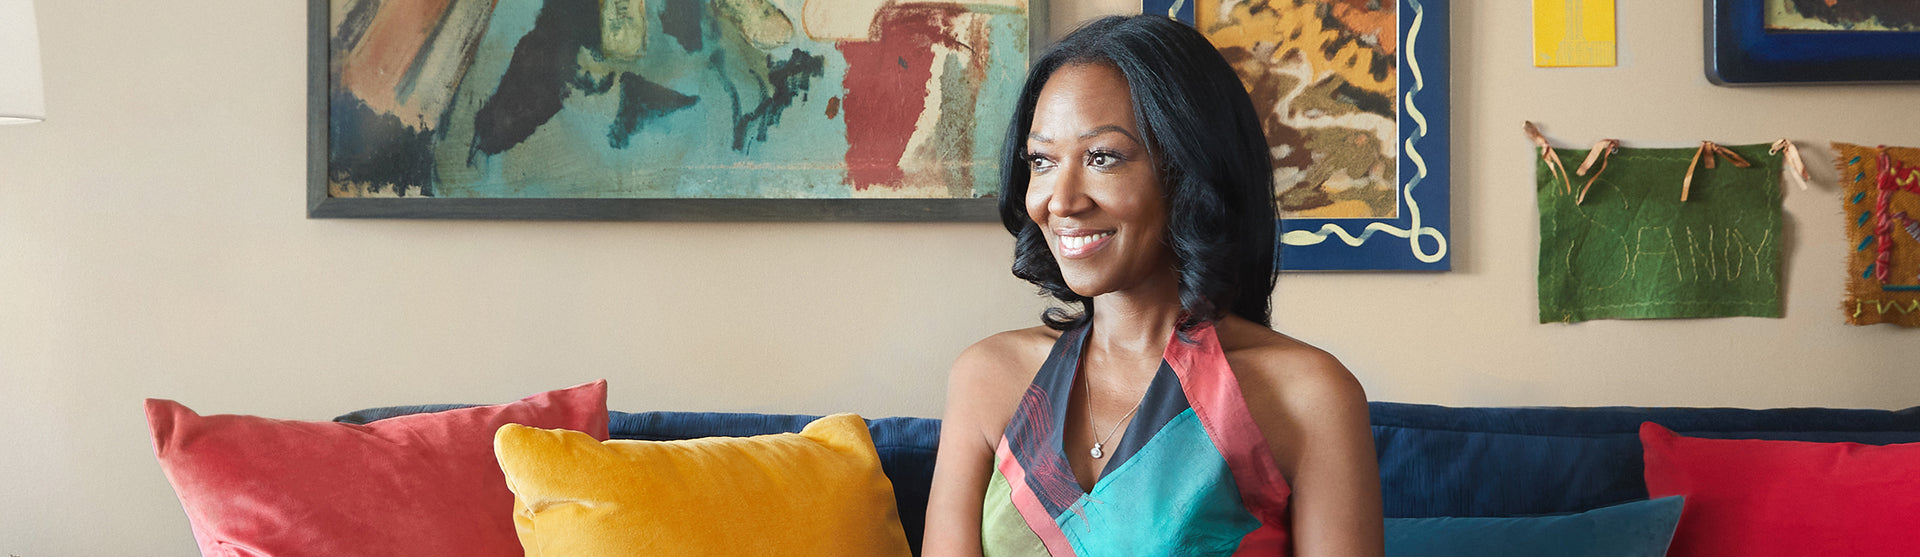 Load video: Join Designer Keita Turner for a Tour of Cosulich Interiors Showroom